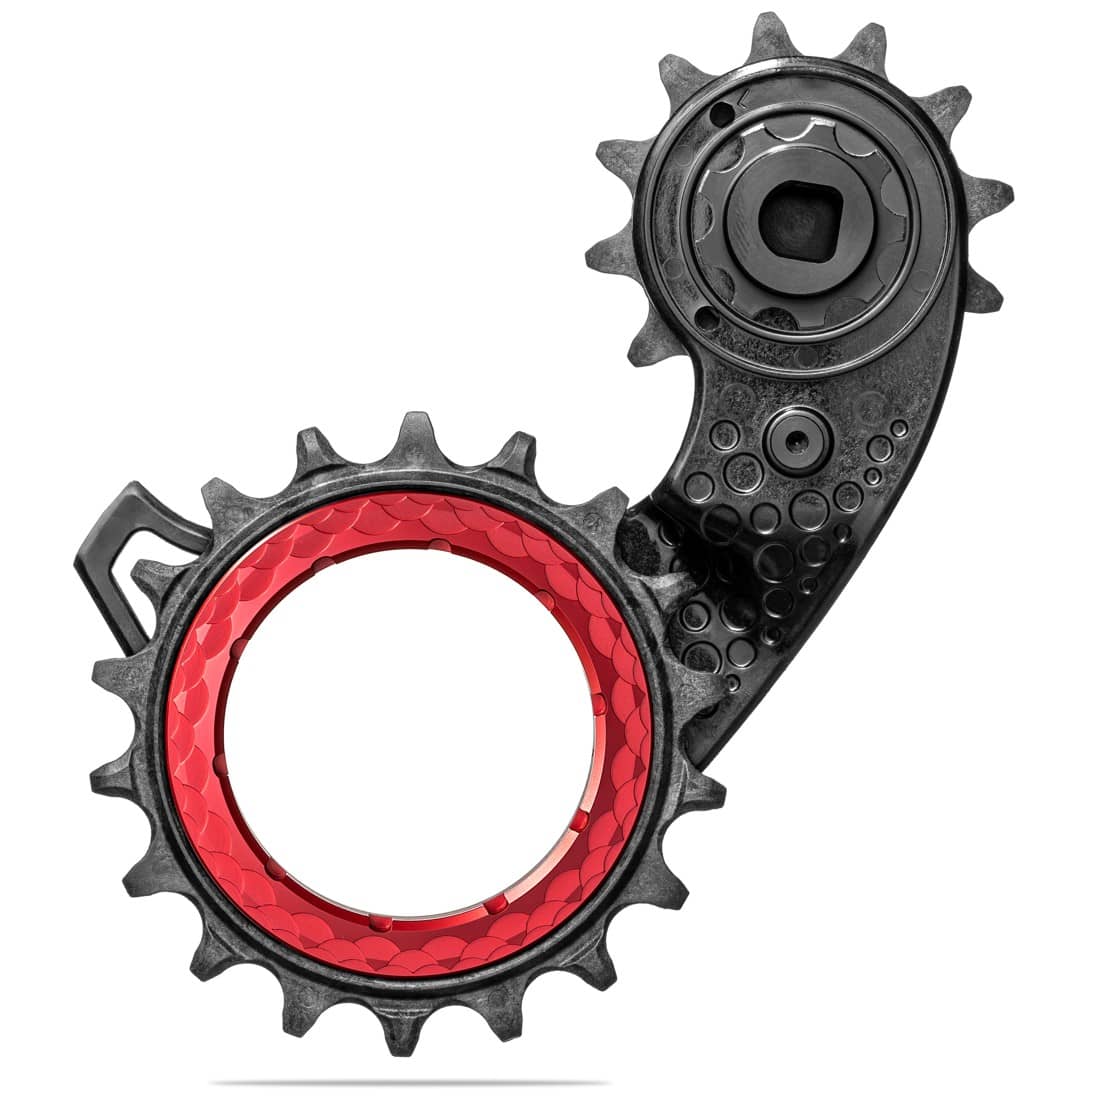 Hollowcage carbon ceramic oversized derailleur pulley cage for Sram AXS